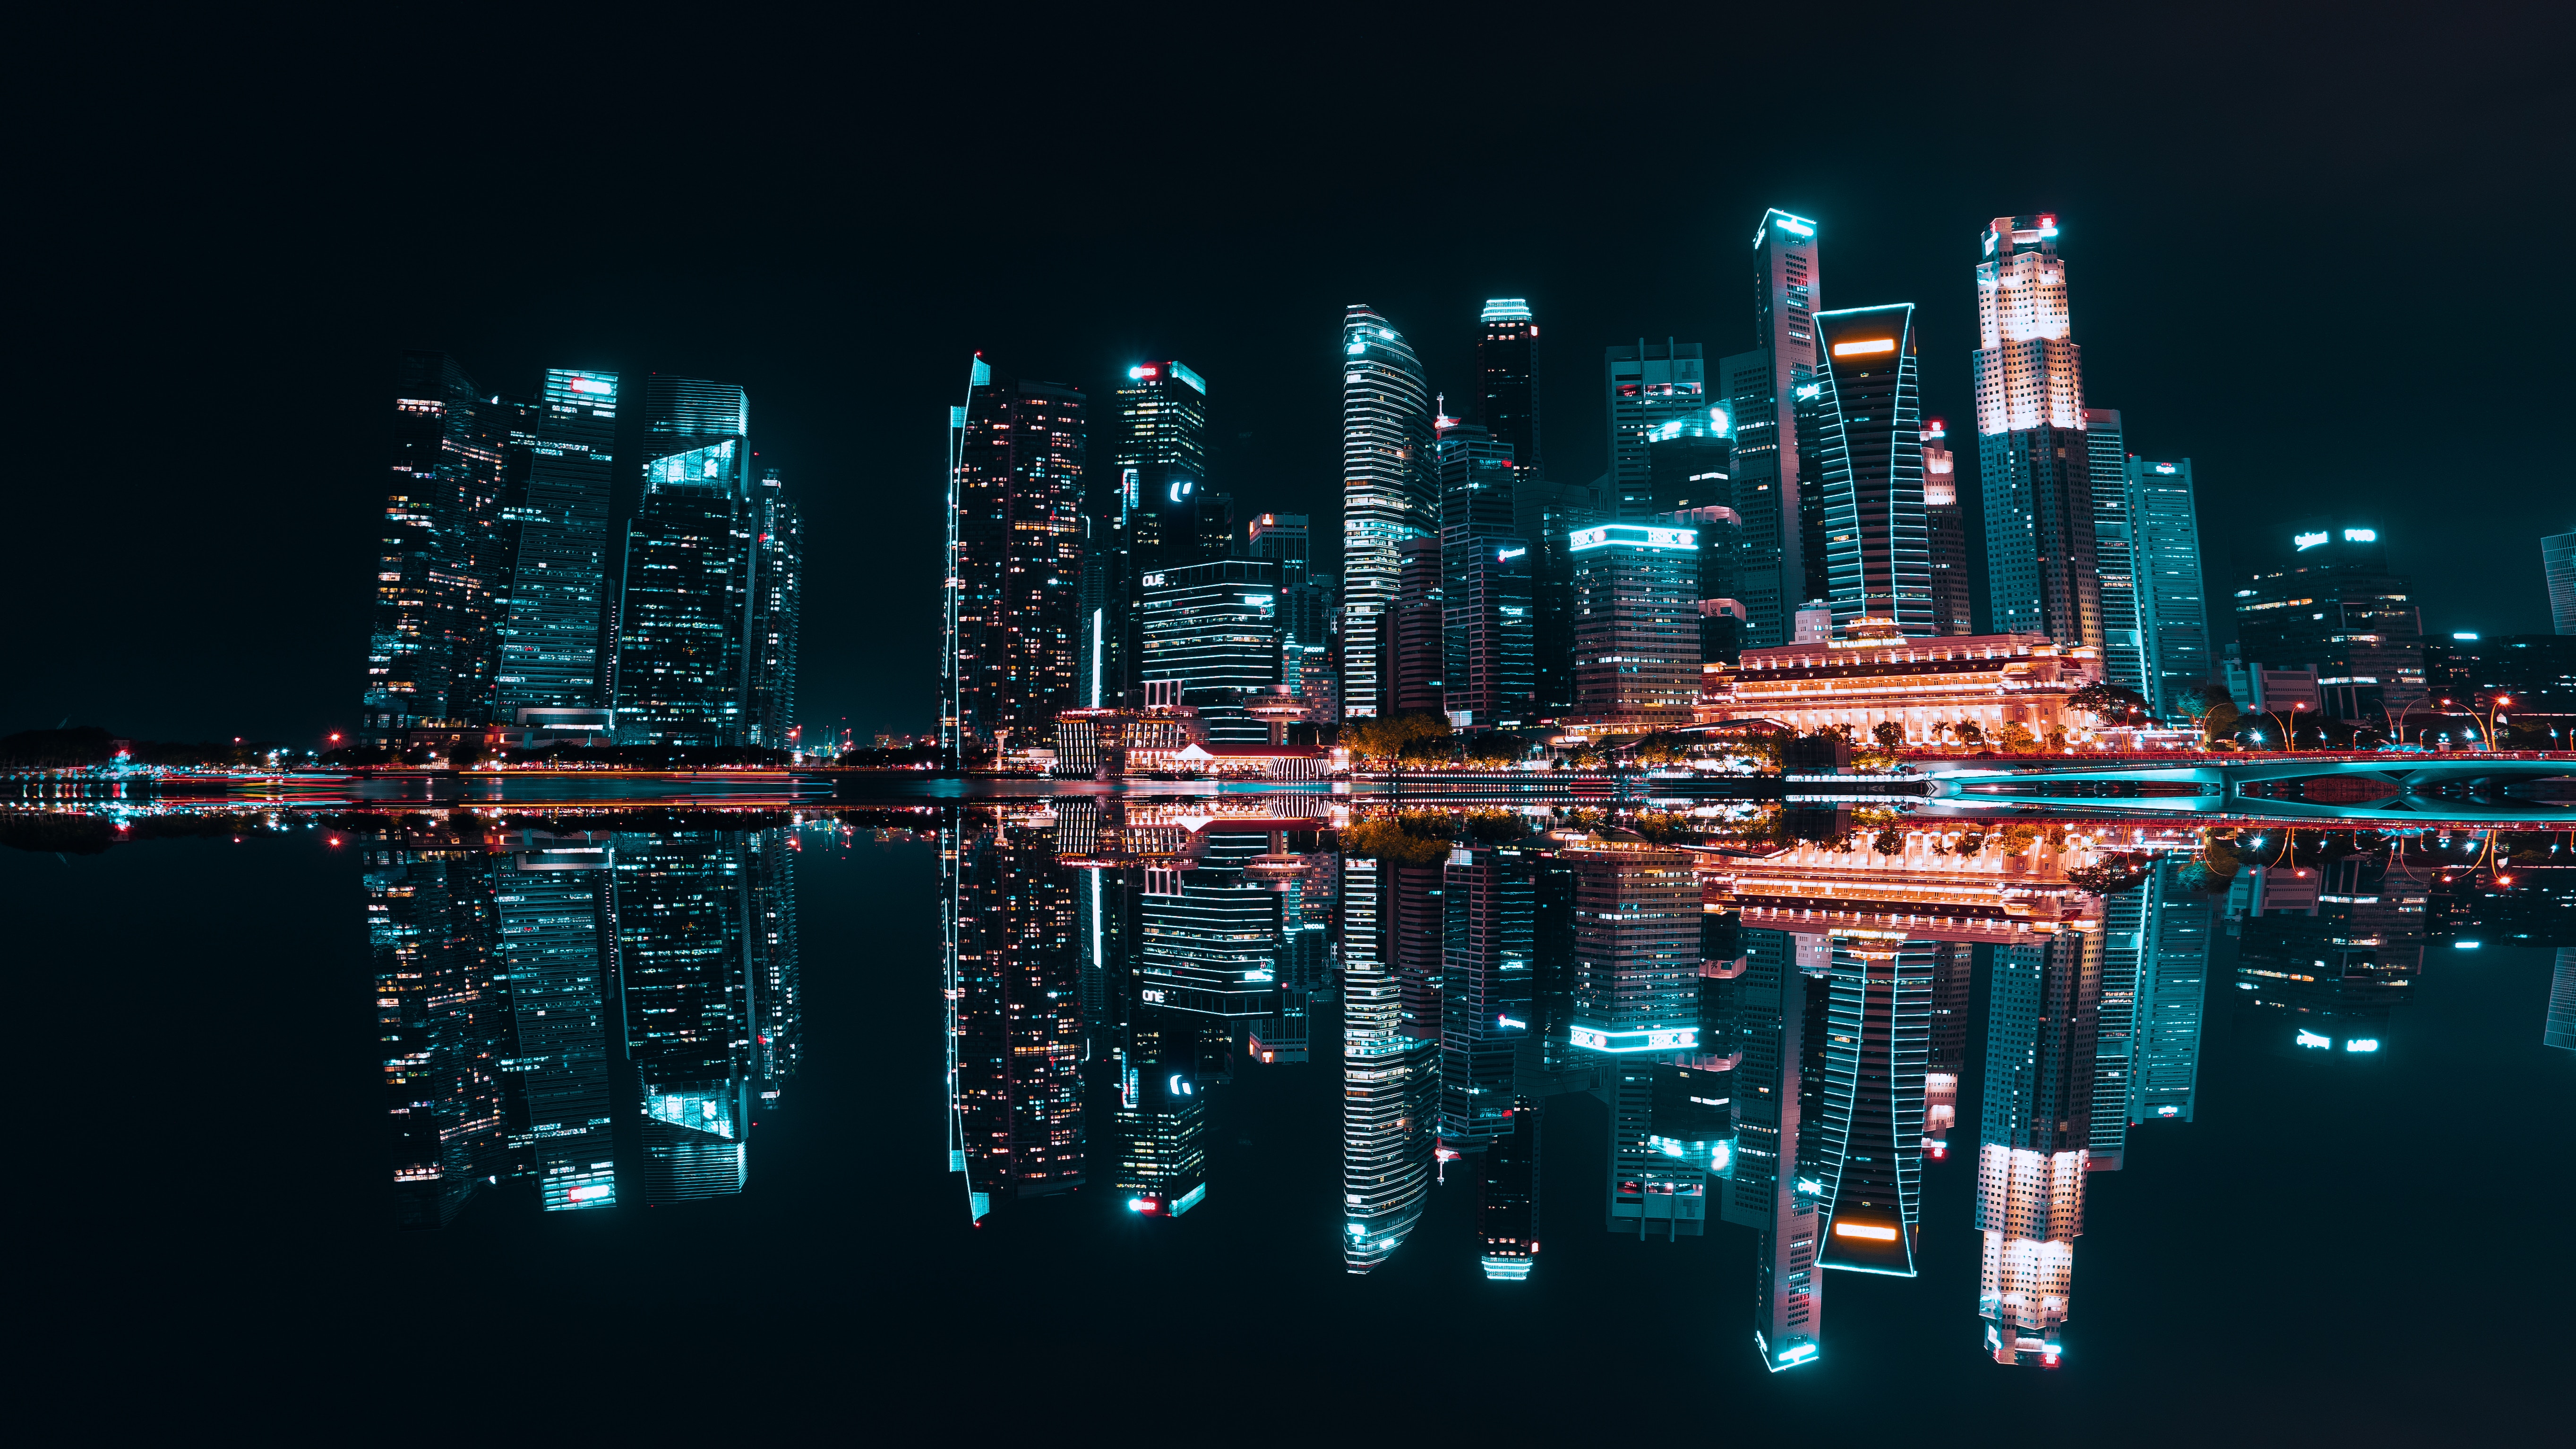 night city, illumination, cities, building, lake, reflection, skyscrapers, backlight, electricity Full HD